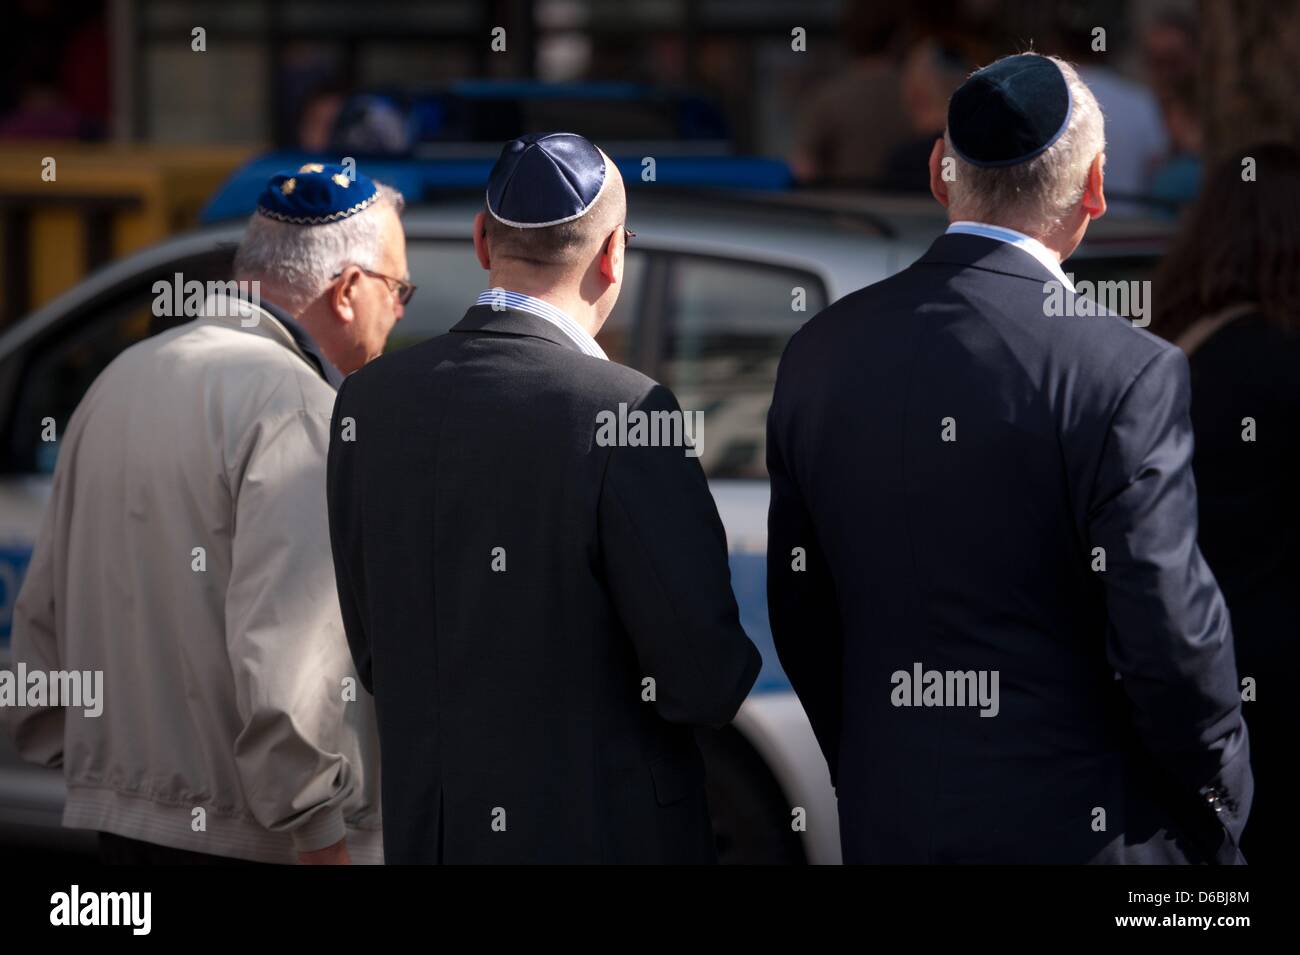 People walk along the streets wearing kippahs during a kippah flash mob in Berlin, Germany, 01 September 2012. The flash mob was initiated as a reaction to a recent brutal attack against a rabbi in the Berlin district Friedenau. Photo: SEBASTIAN KAHNERT Stock Photo